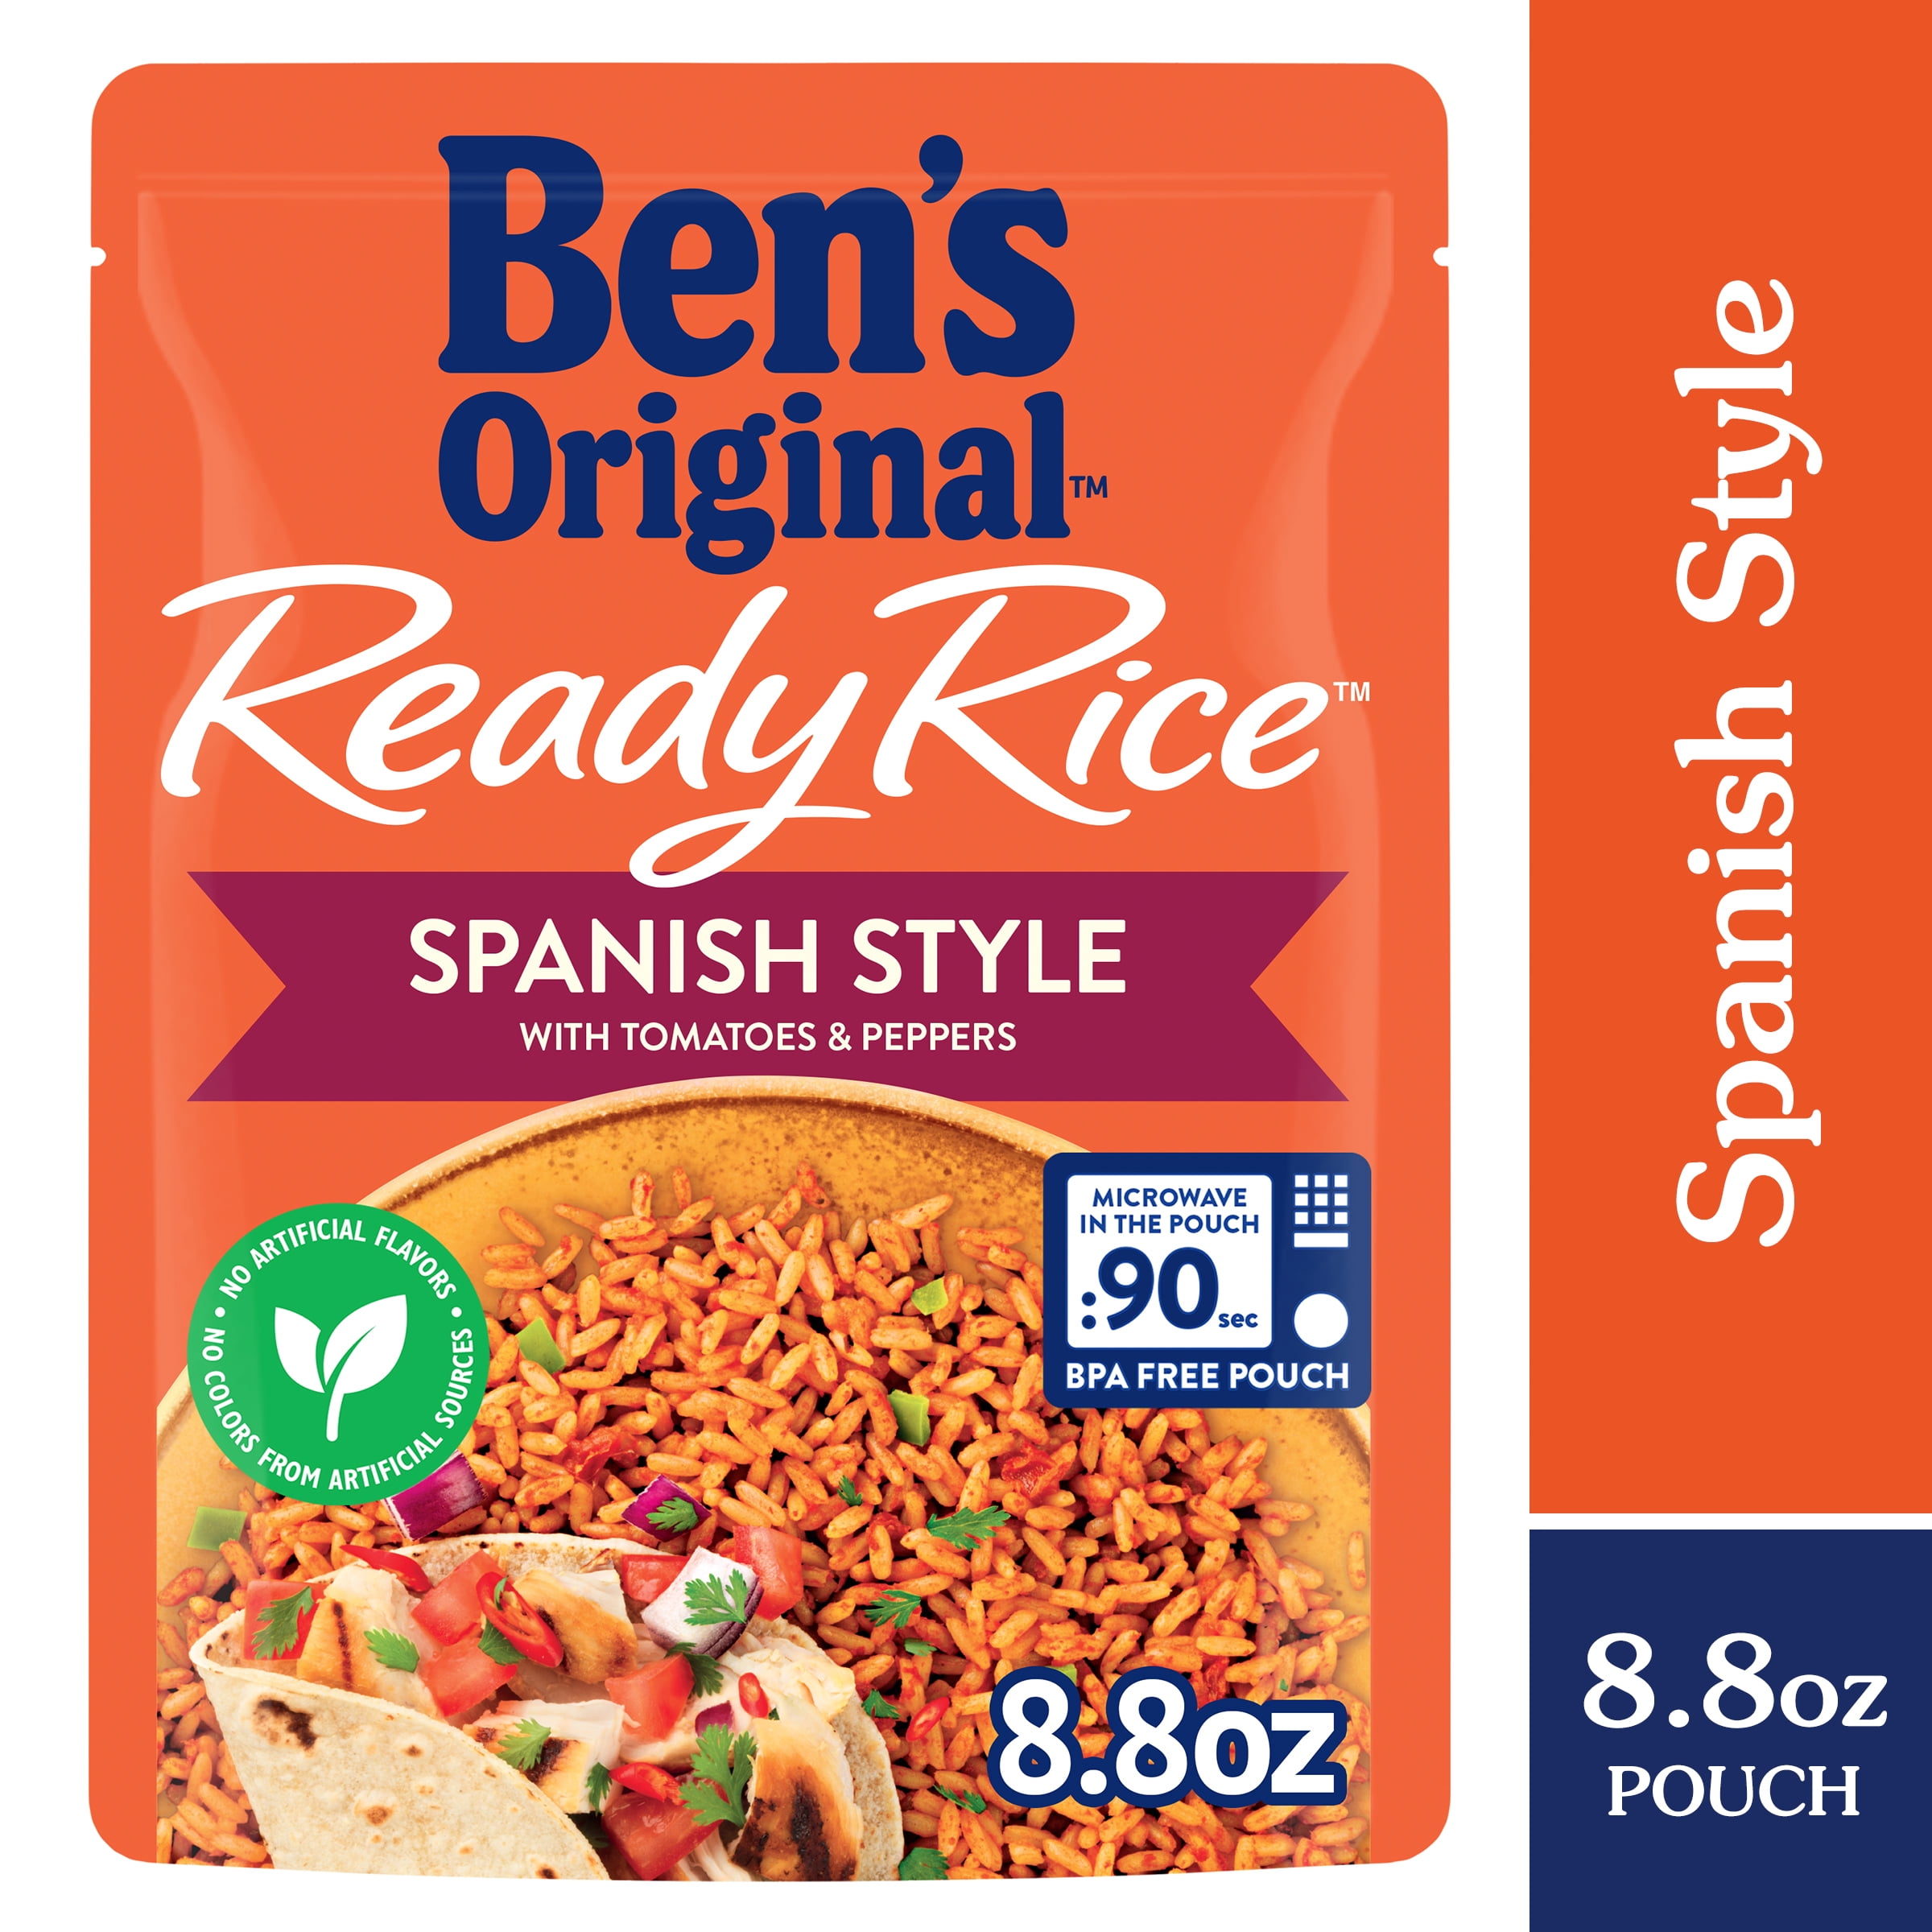 BEN'S ORIGINAL Ready Rice Spanish Style Flavored Rice, Easy Dinner Side, 8.8 OZ Pouch